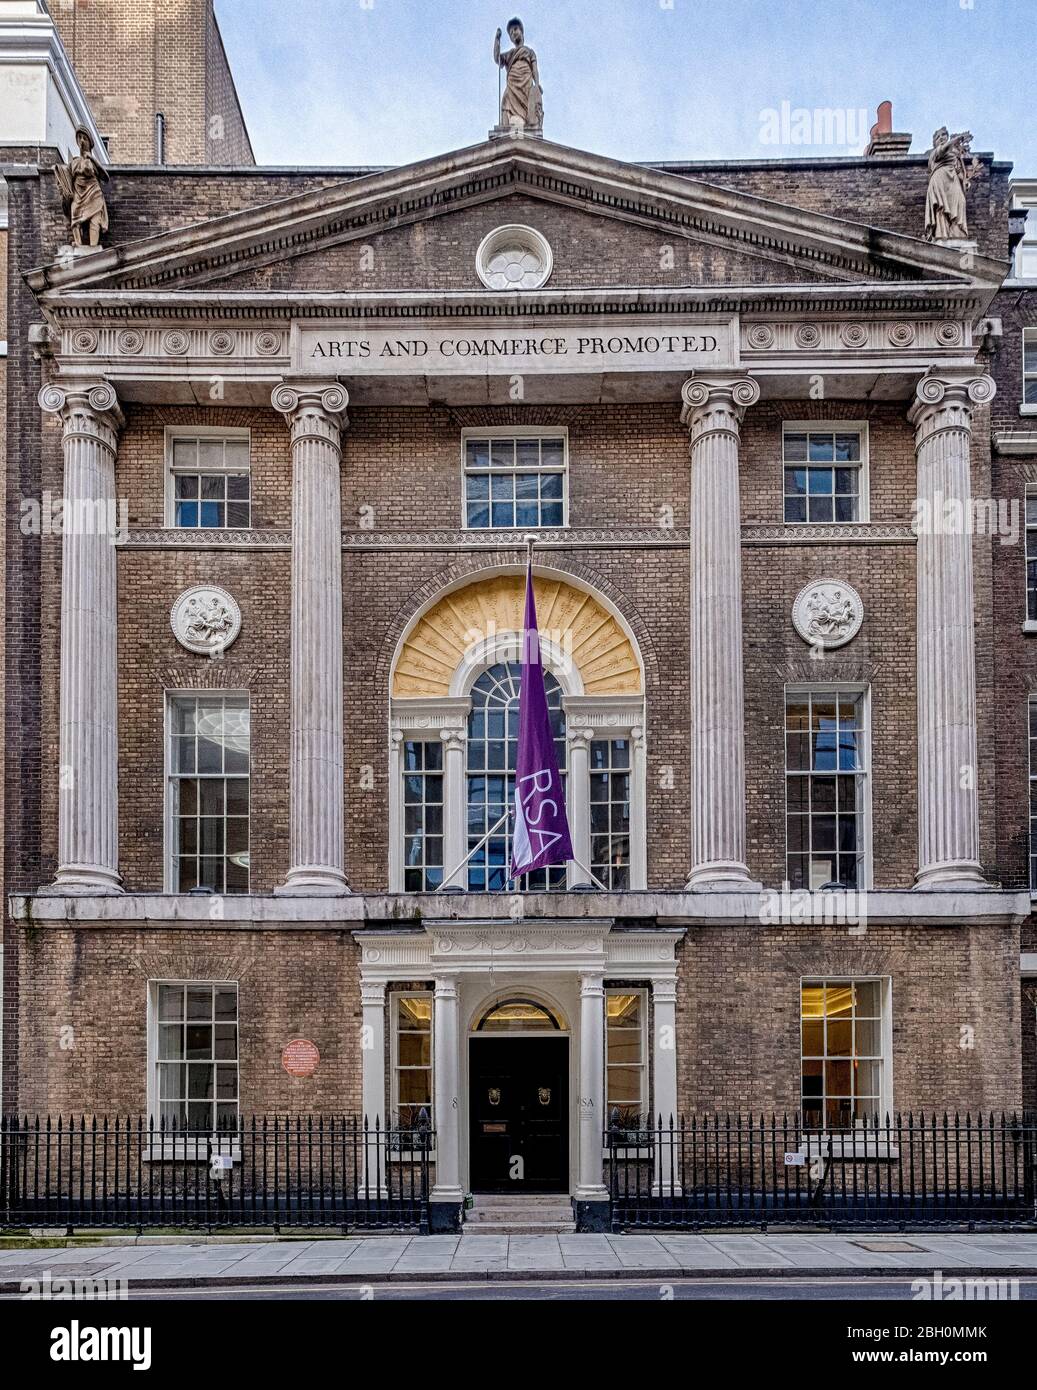 The RSA (Royal Society for the encouragement of Arts, Manufactures and Commerce) Building, 8 John Adam Street, London Stock Photo